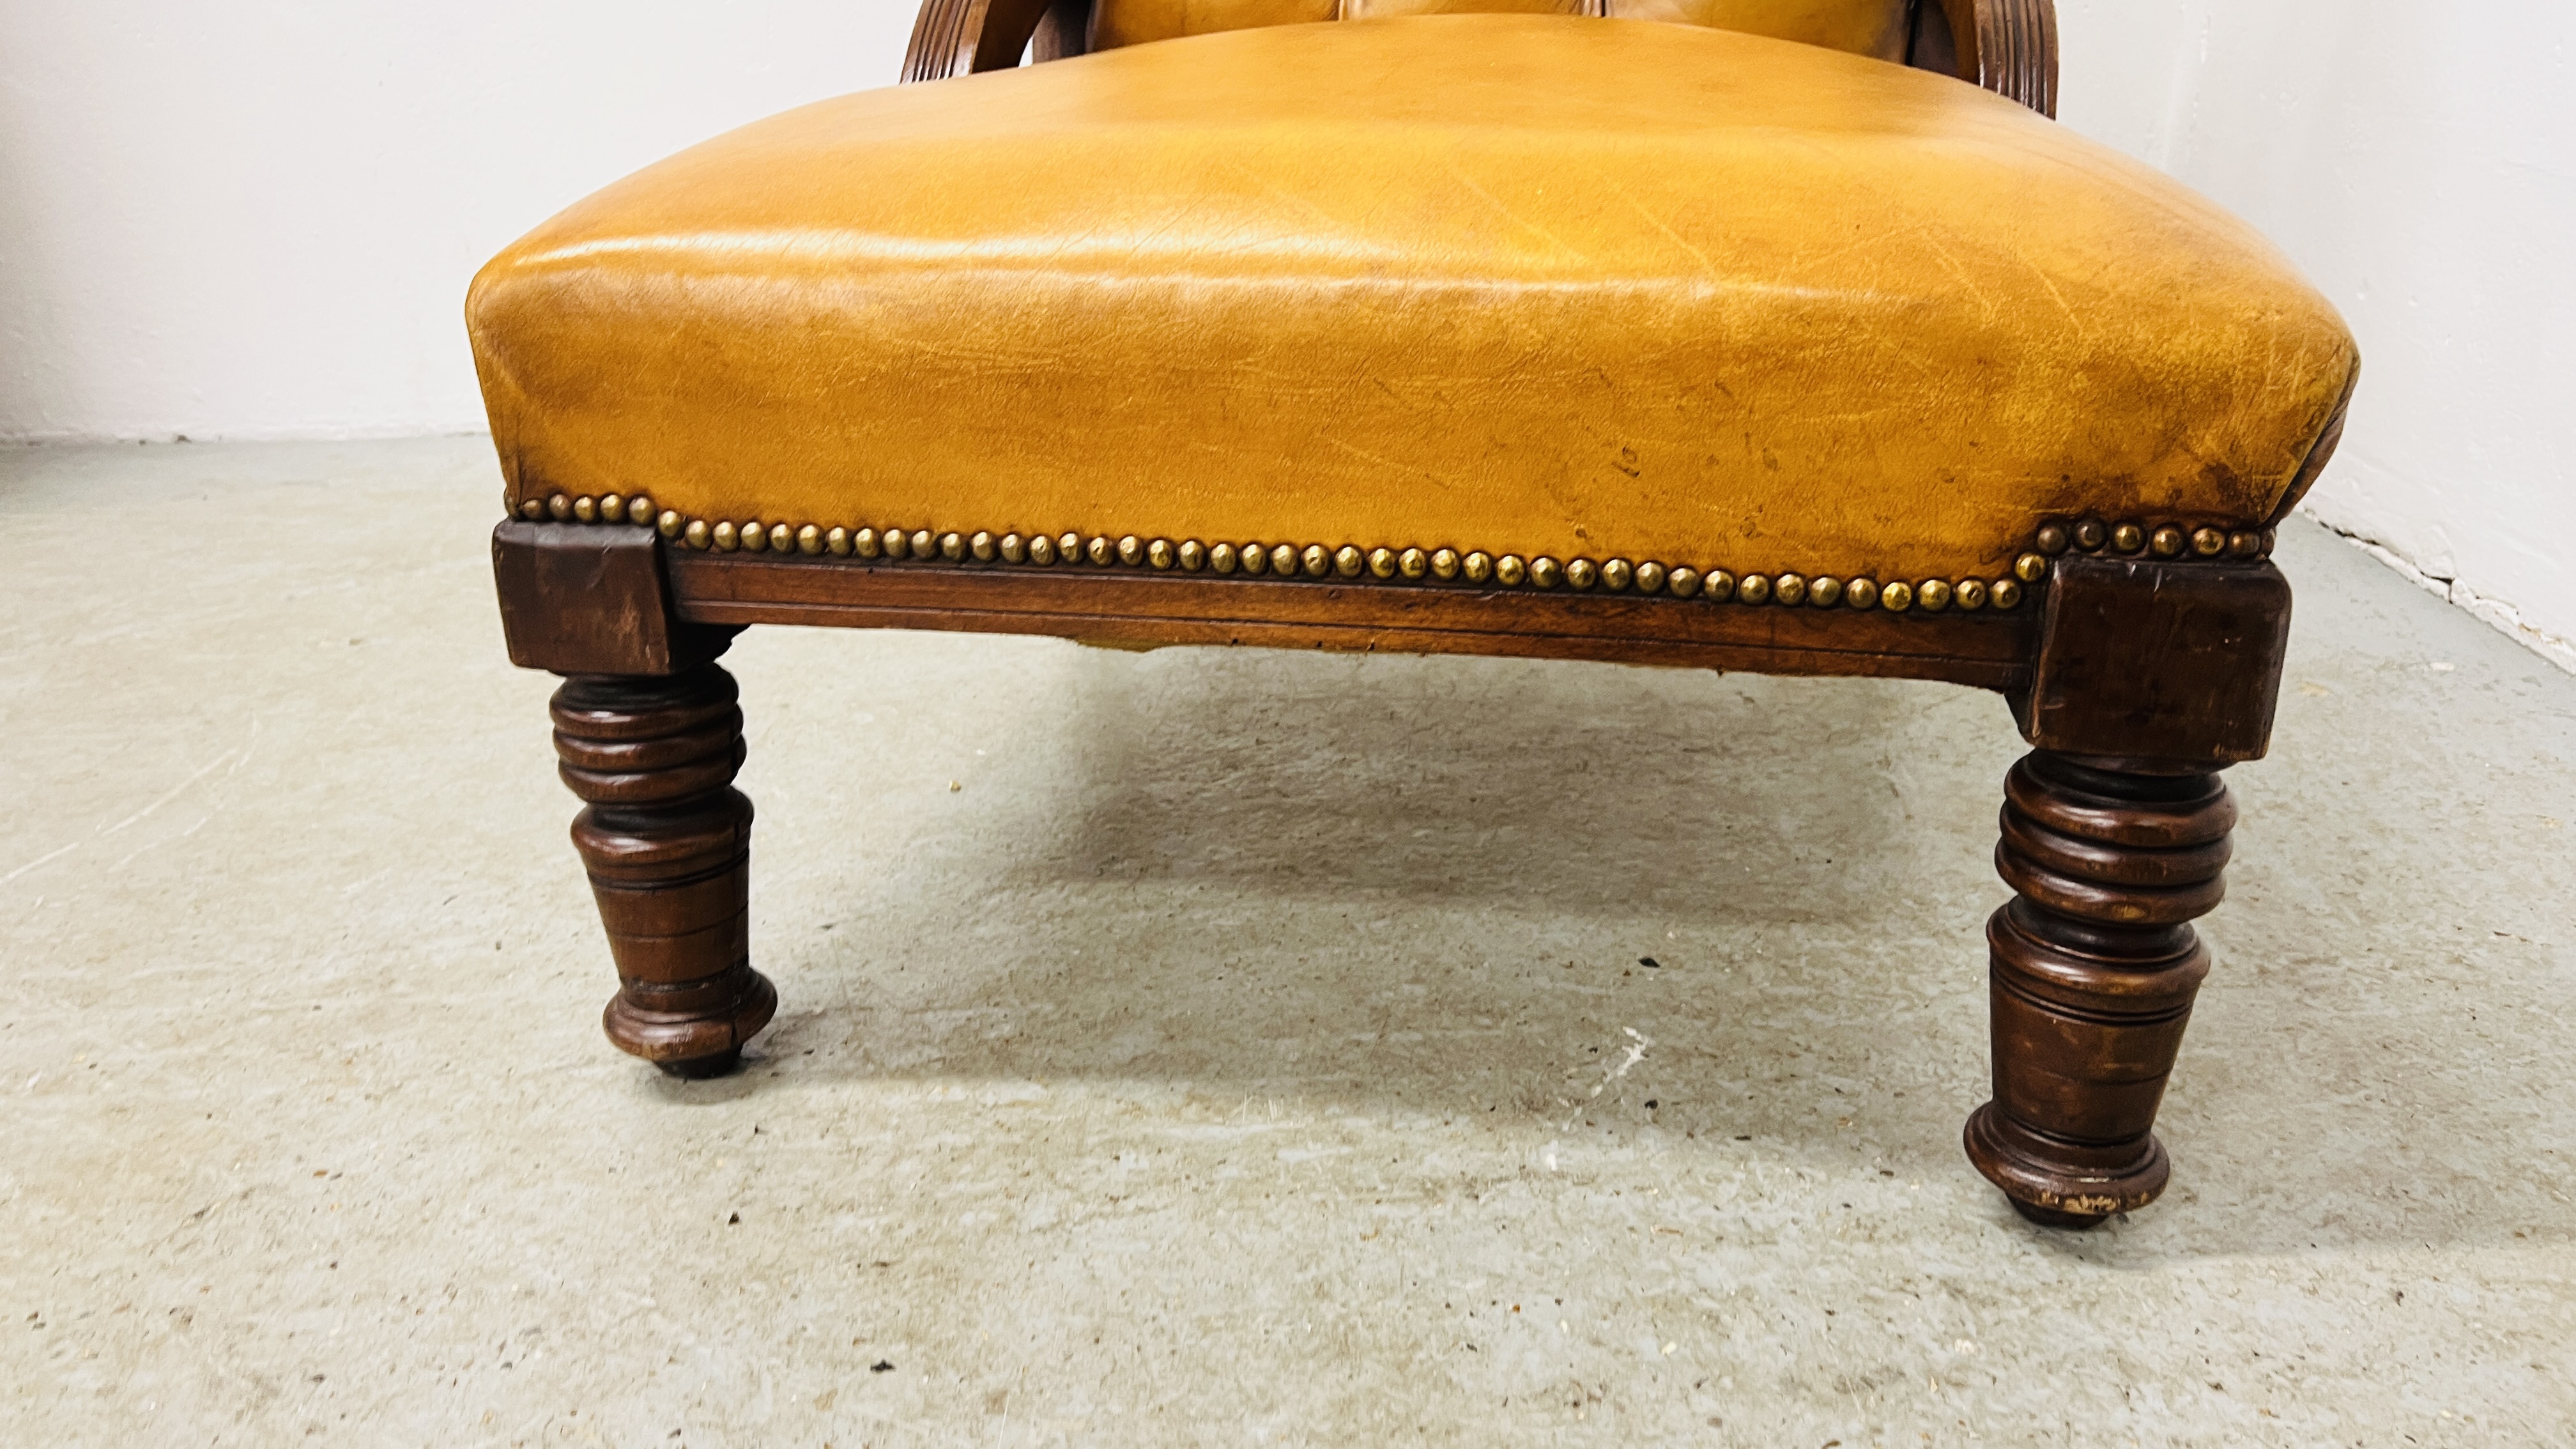 ANTIQUE EDWARDIAN MAHOGANY LOW CHAIR UPHOLSTERED IN TAN LEATHER - BUTTON BACK. - Image 6 of 12